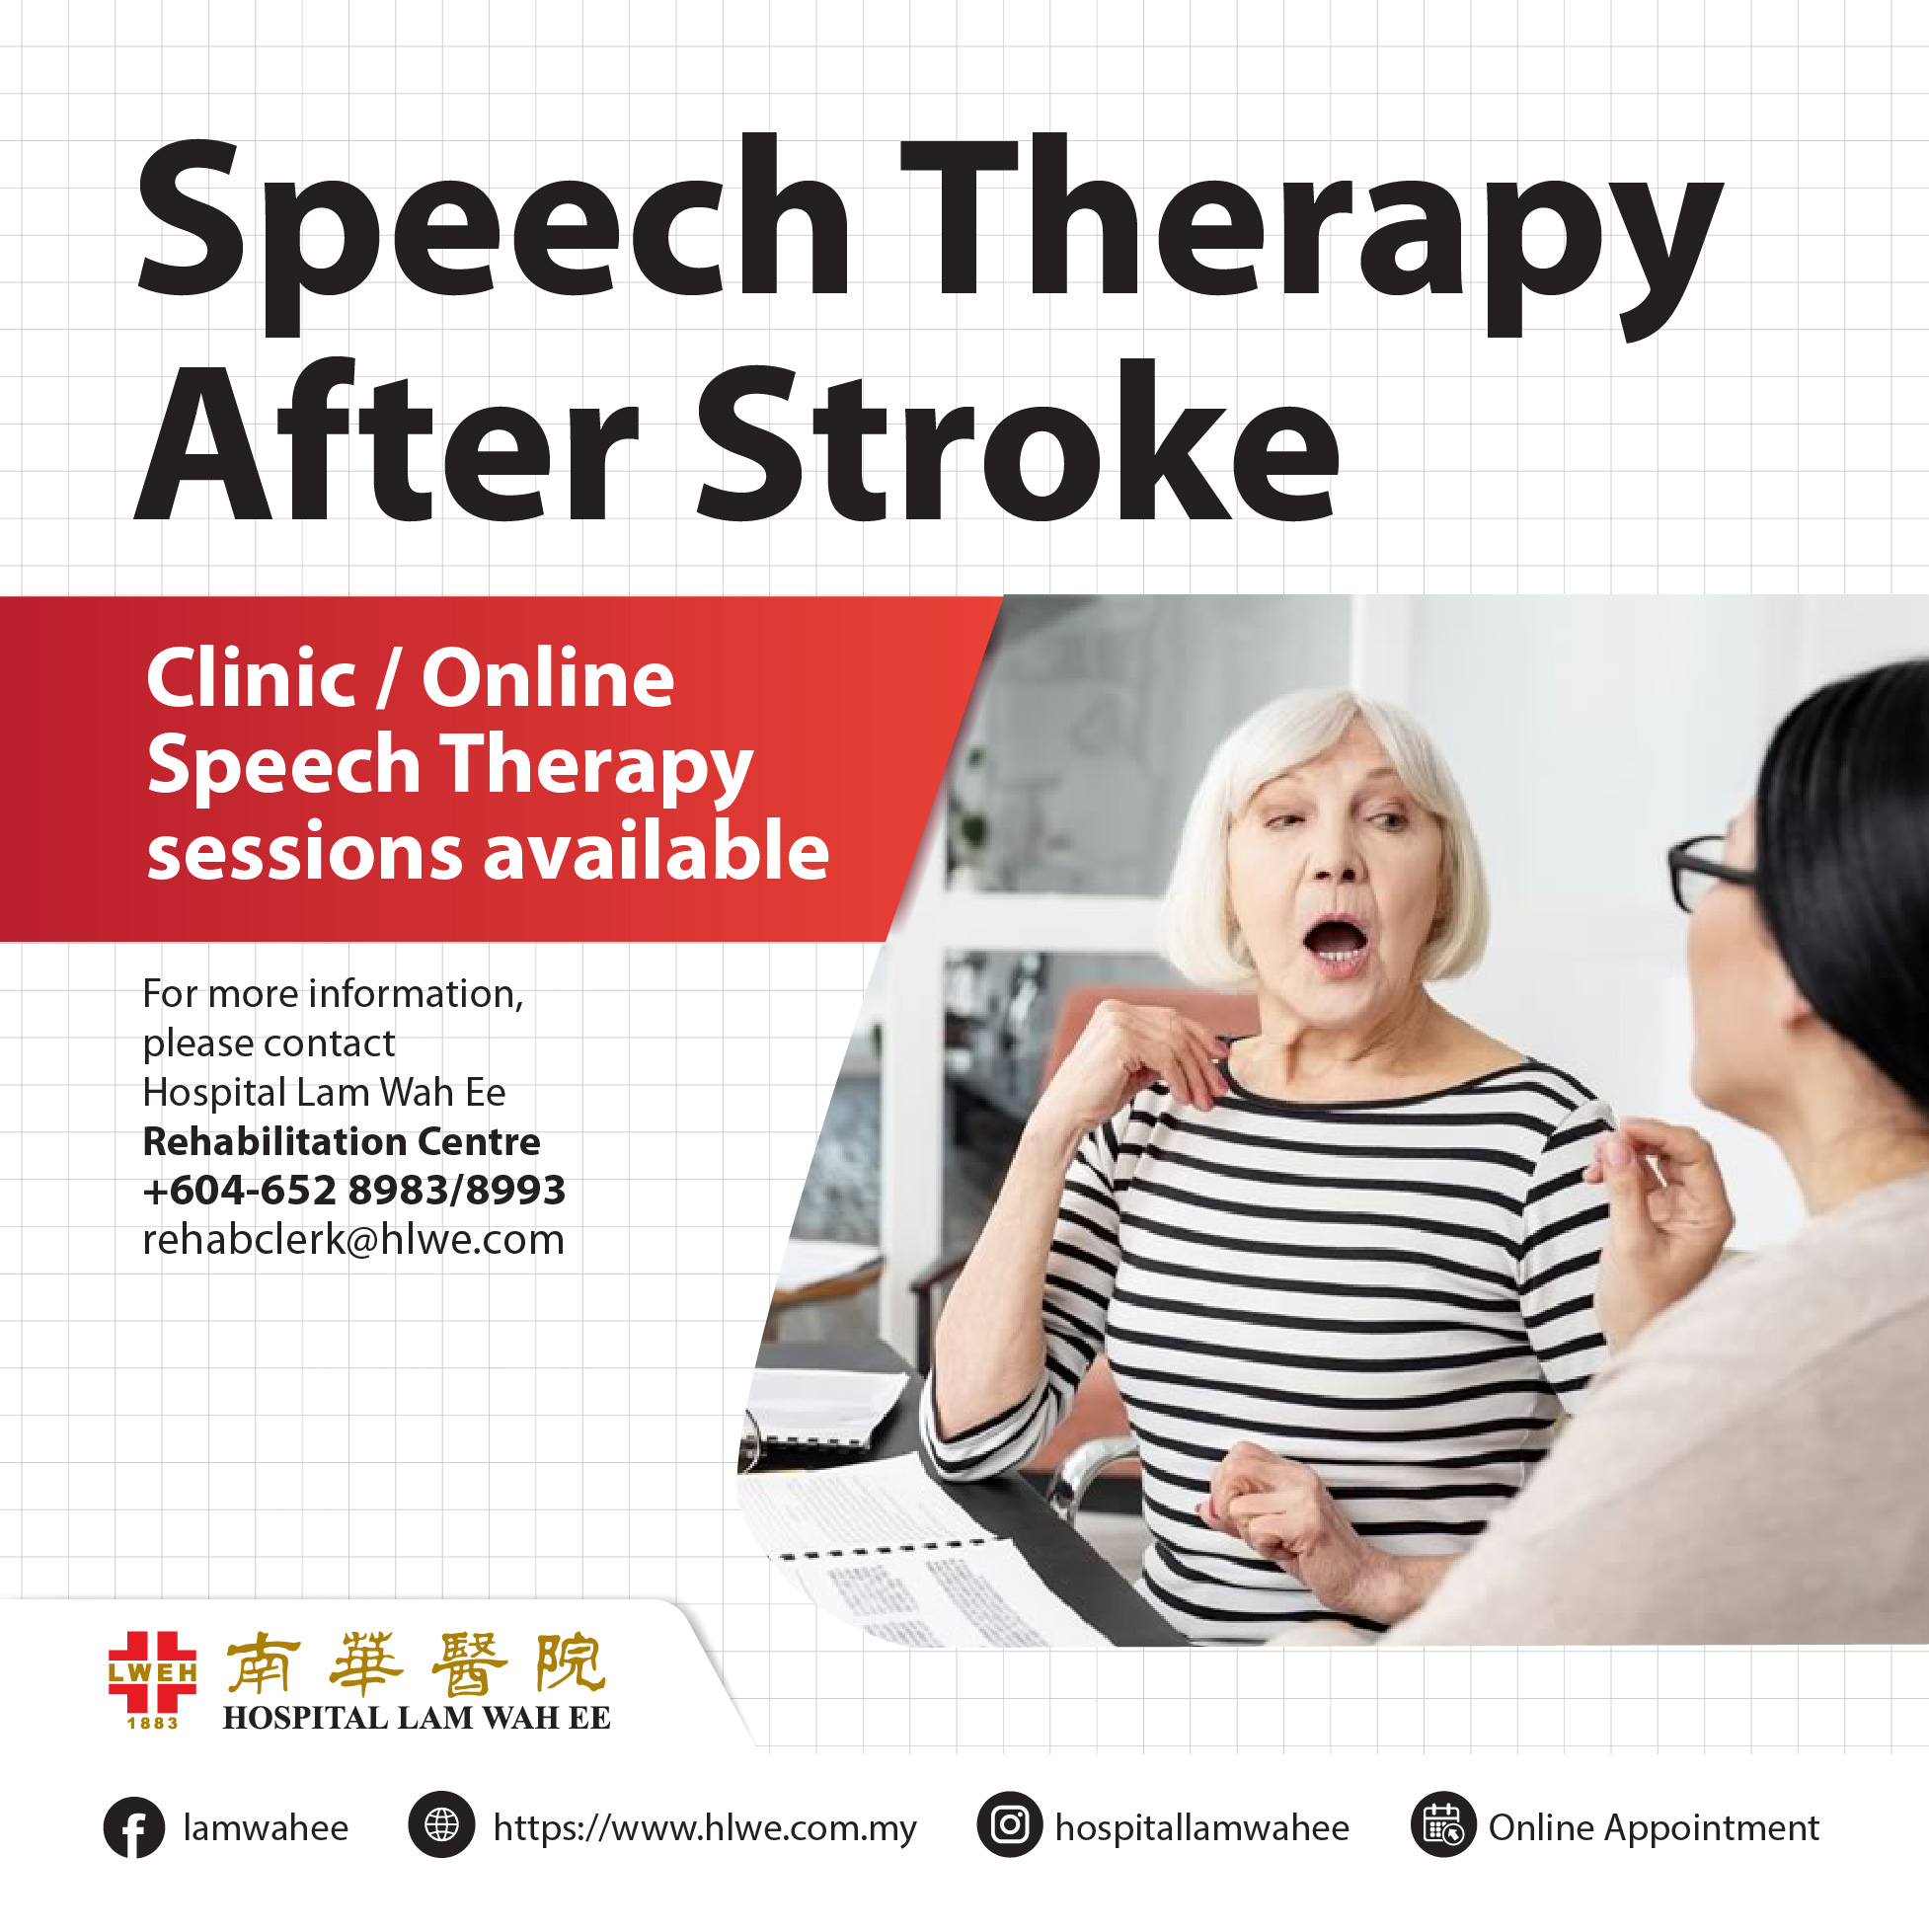 Speech Therapy After Stroke